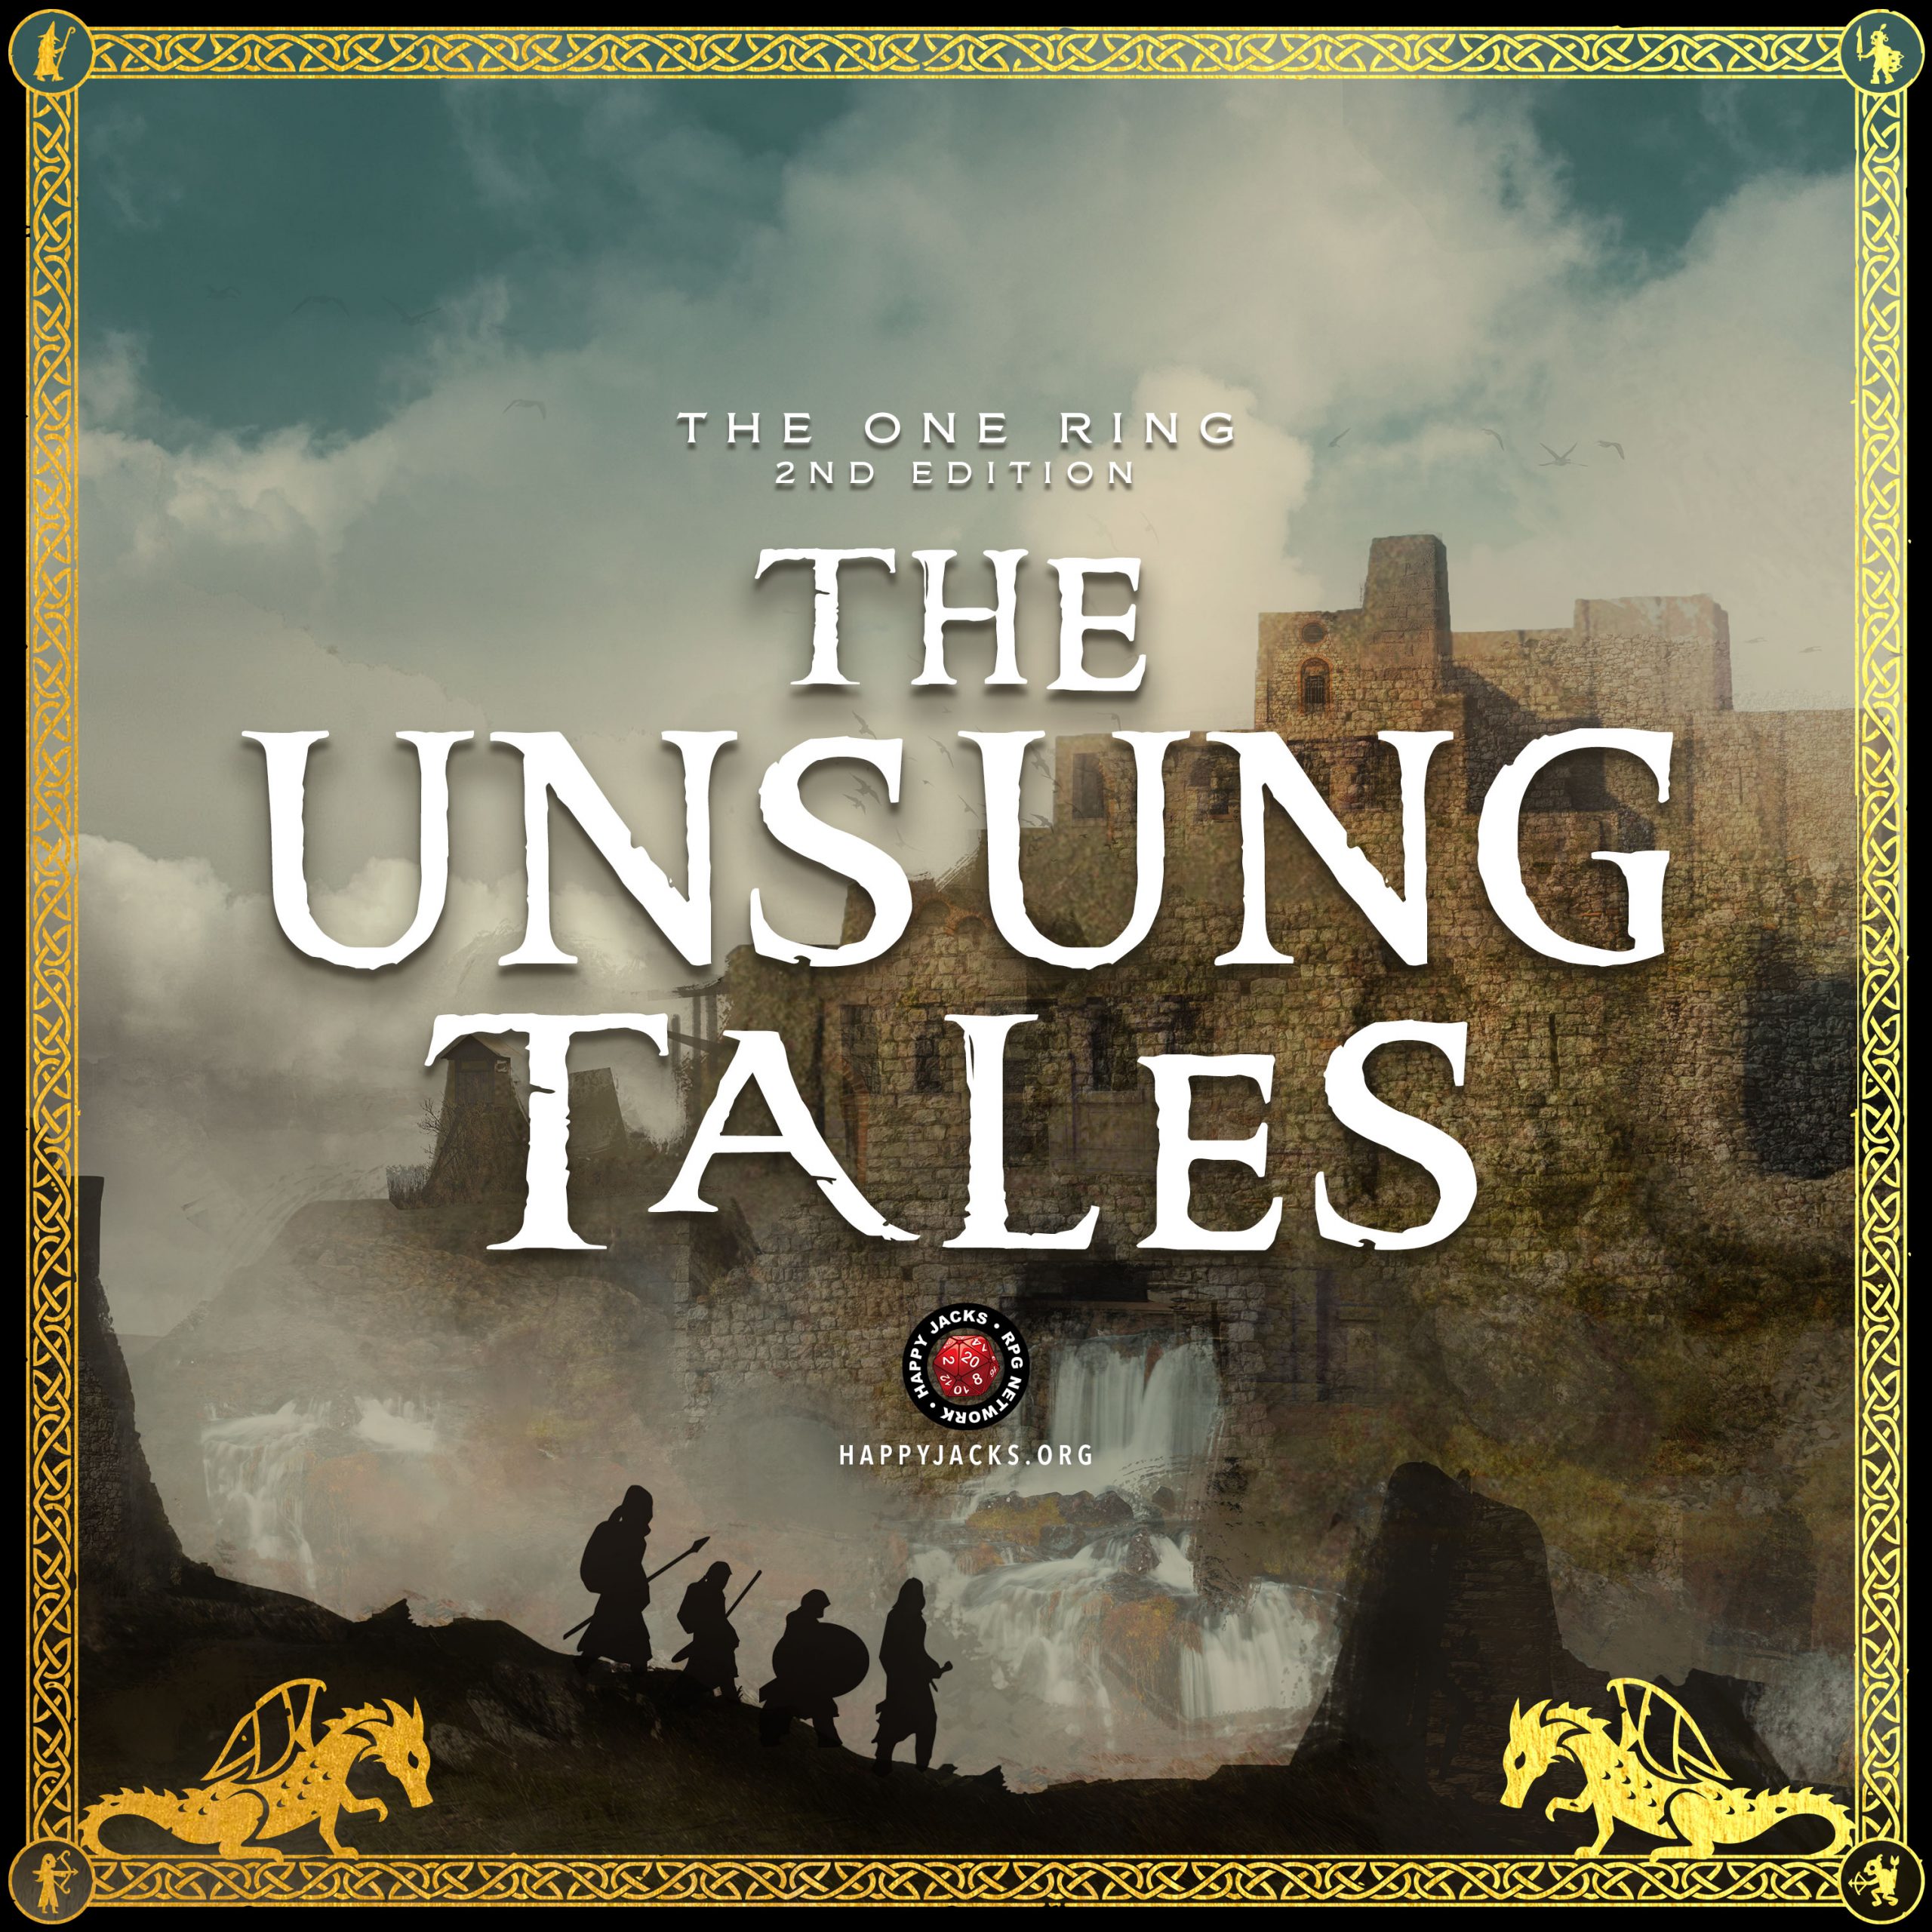 UNSUNG07 Fellowship | The Unsung Tales | The One Ring 2e